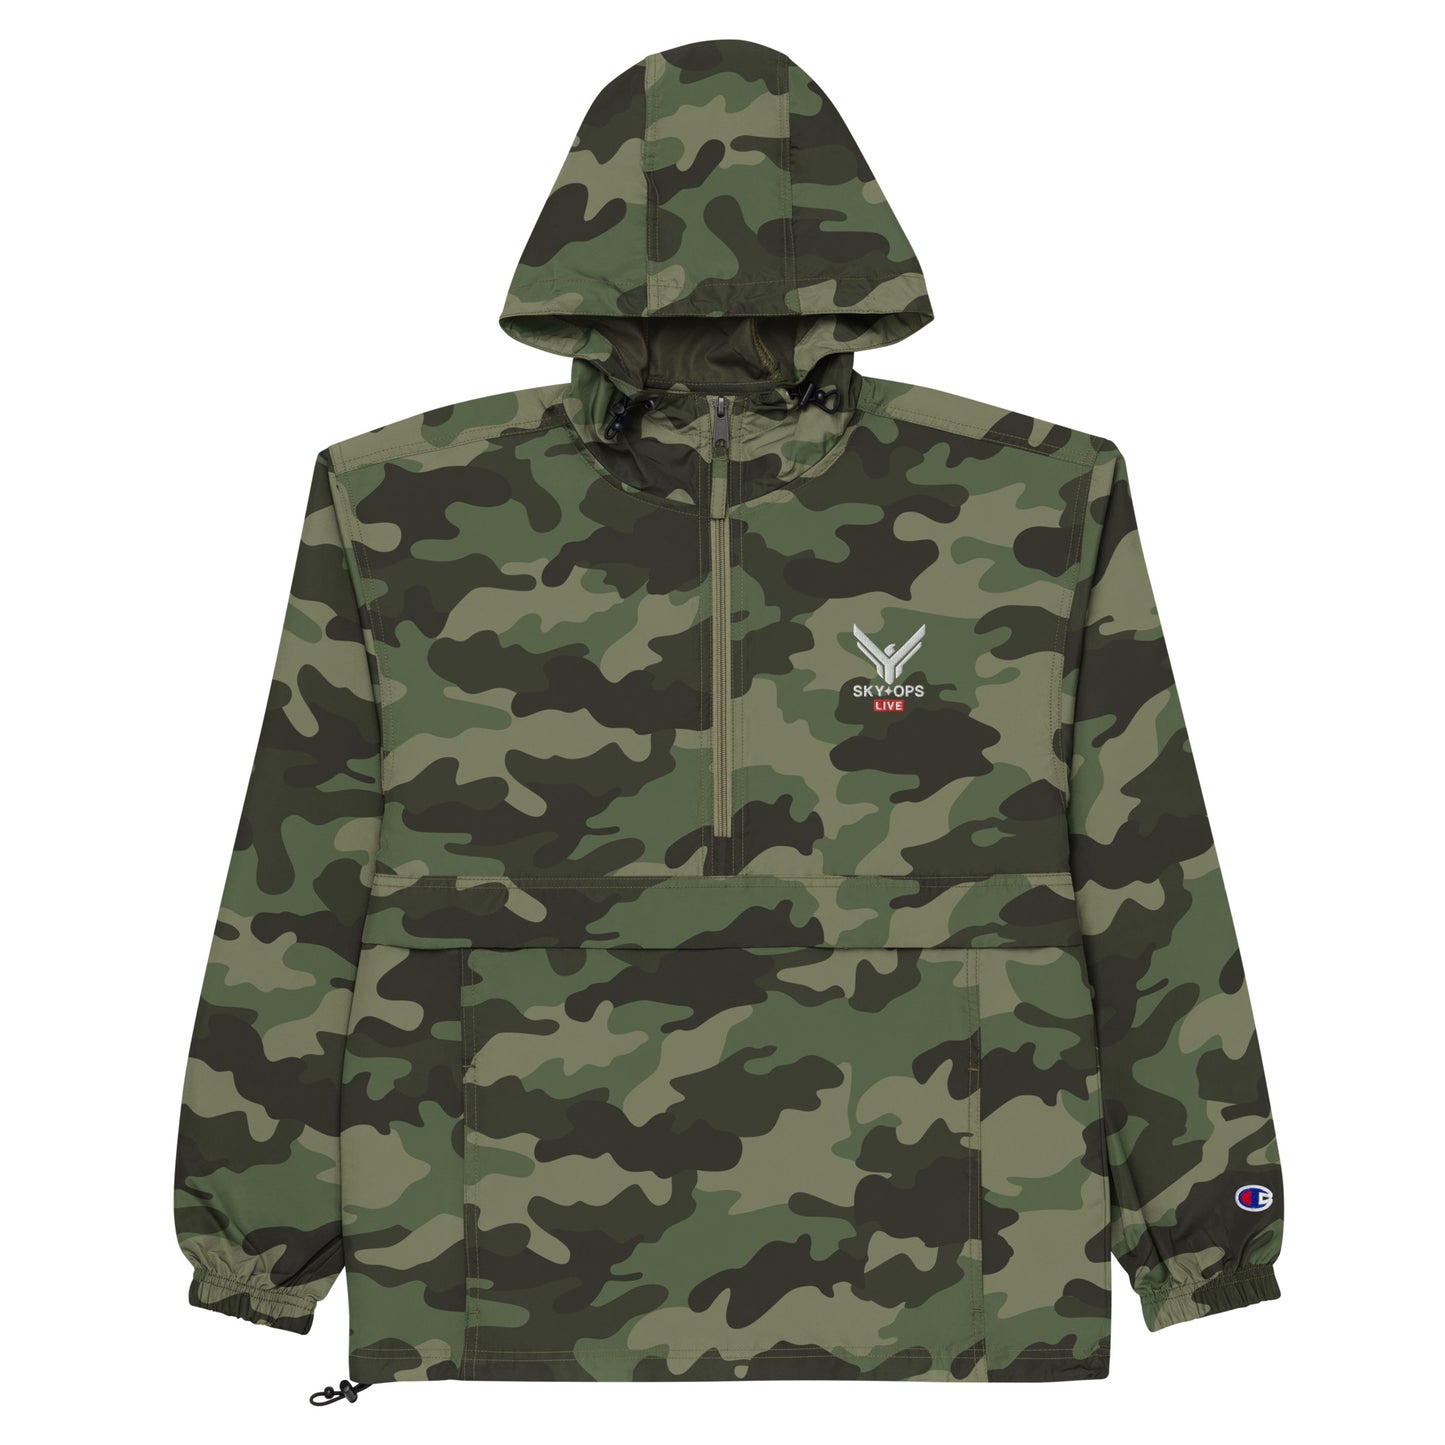 Embroidered Packable Jacket - Sky Ops Live Classic Logo